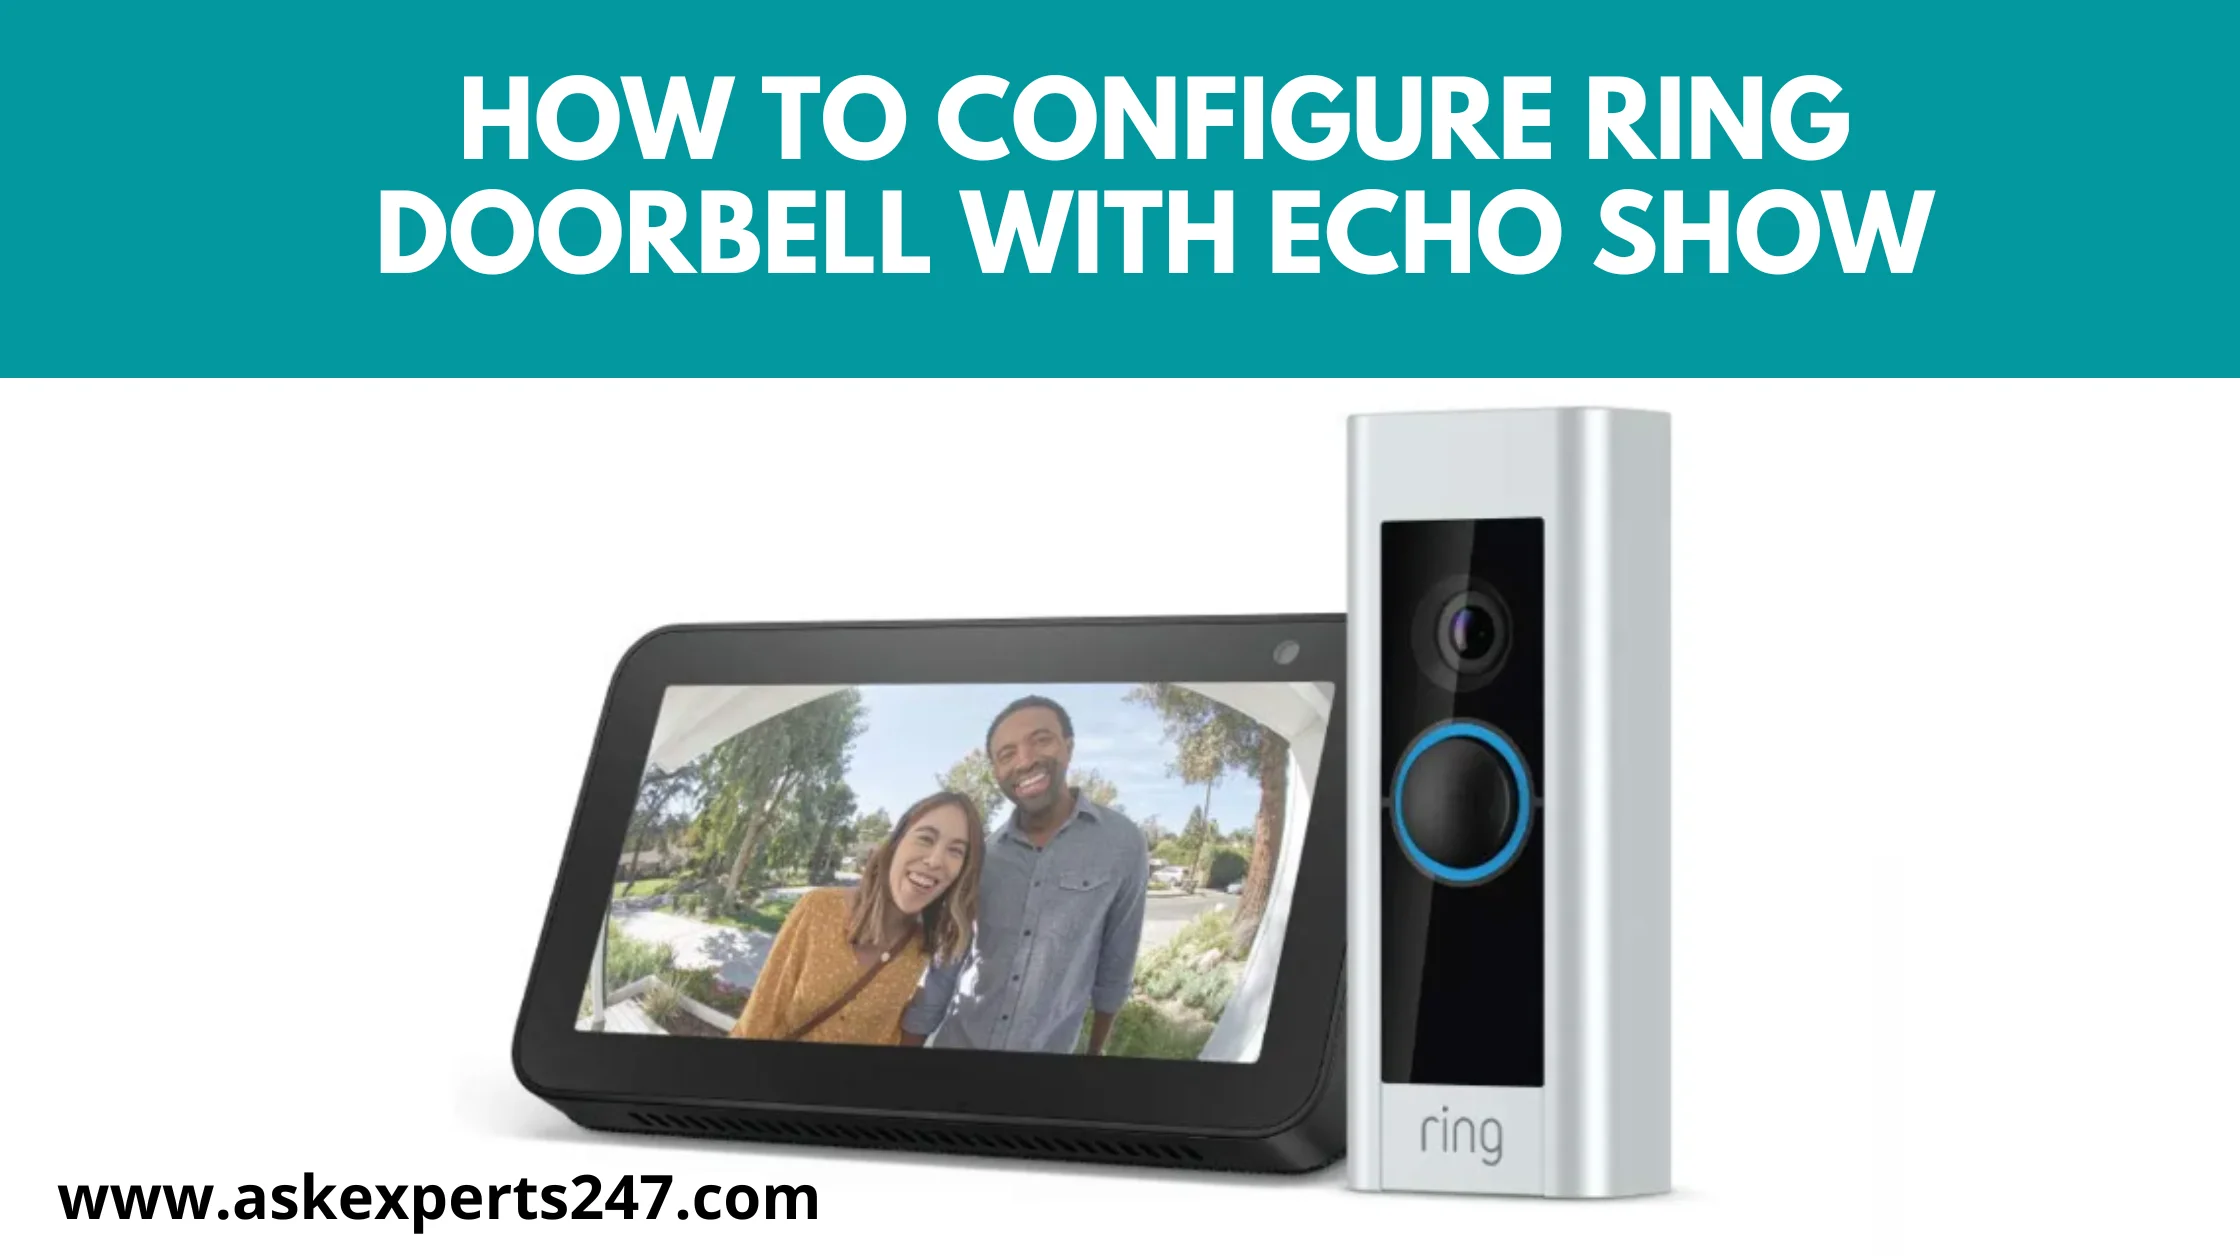 How to configure ring doorbell with echo show?